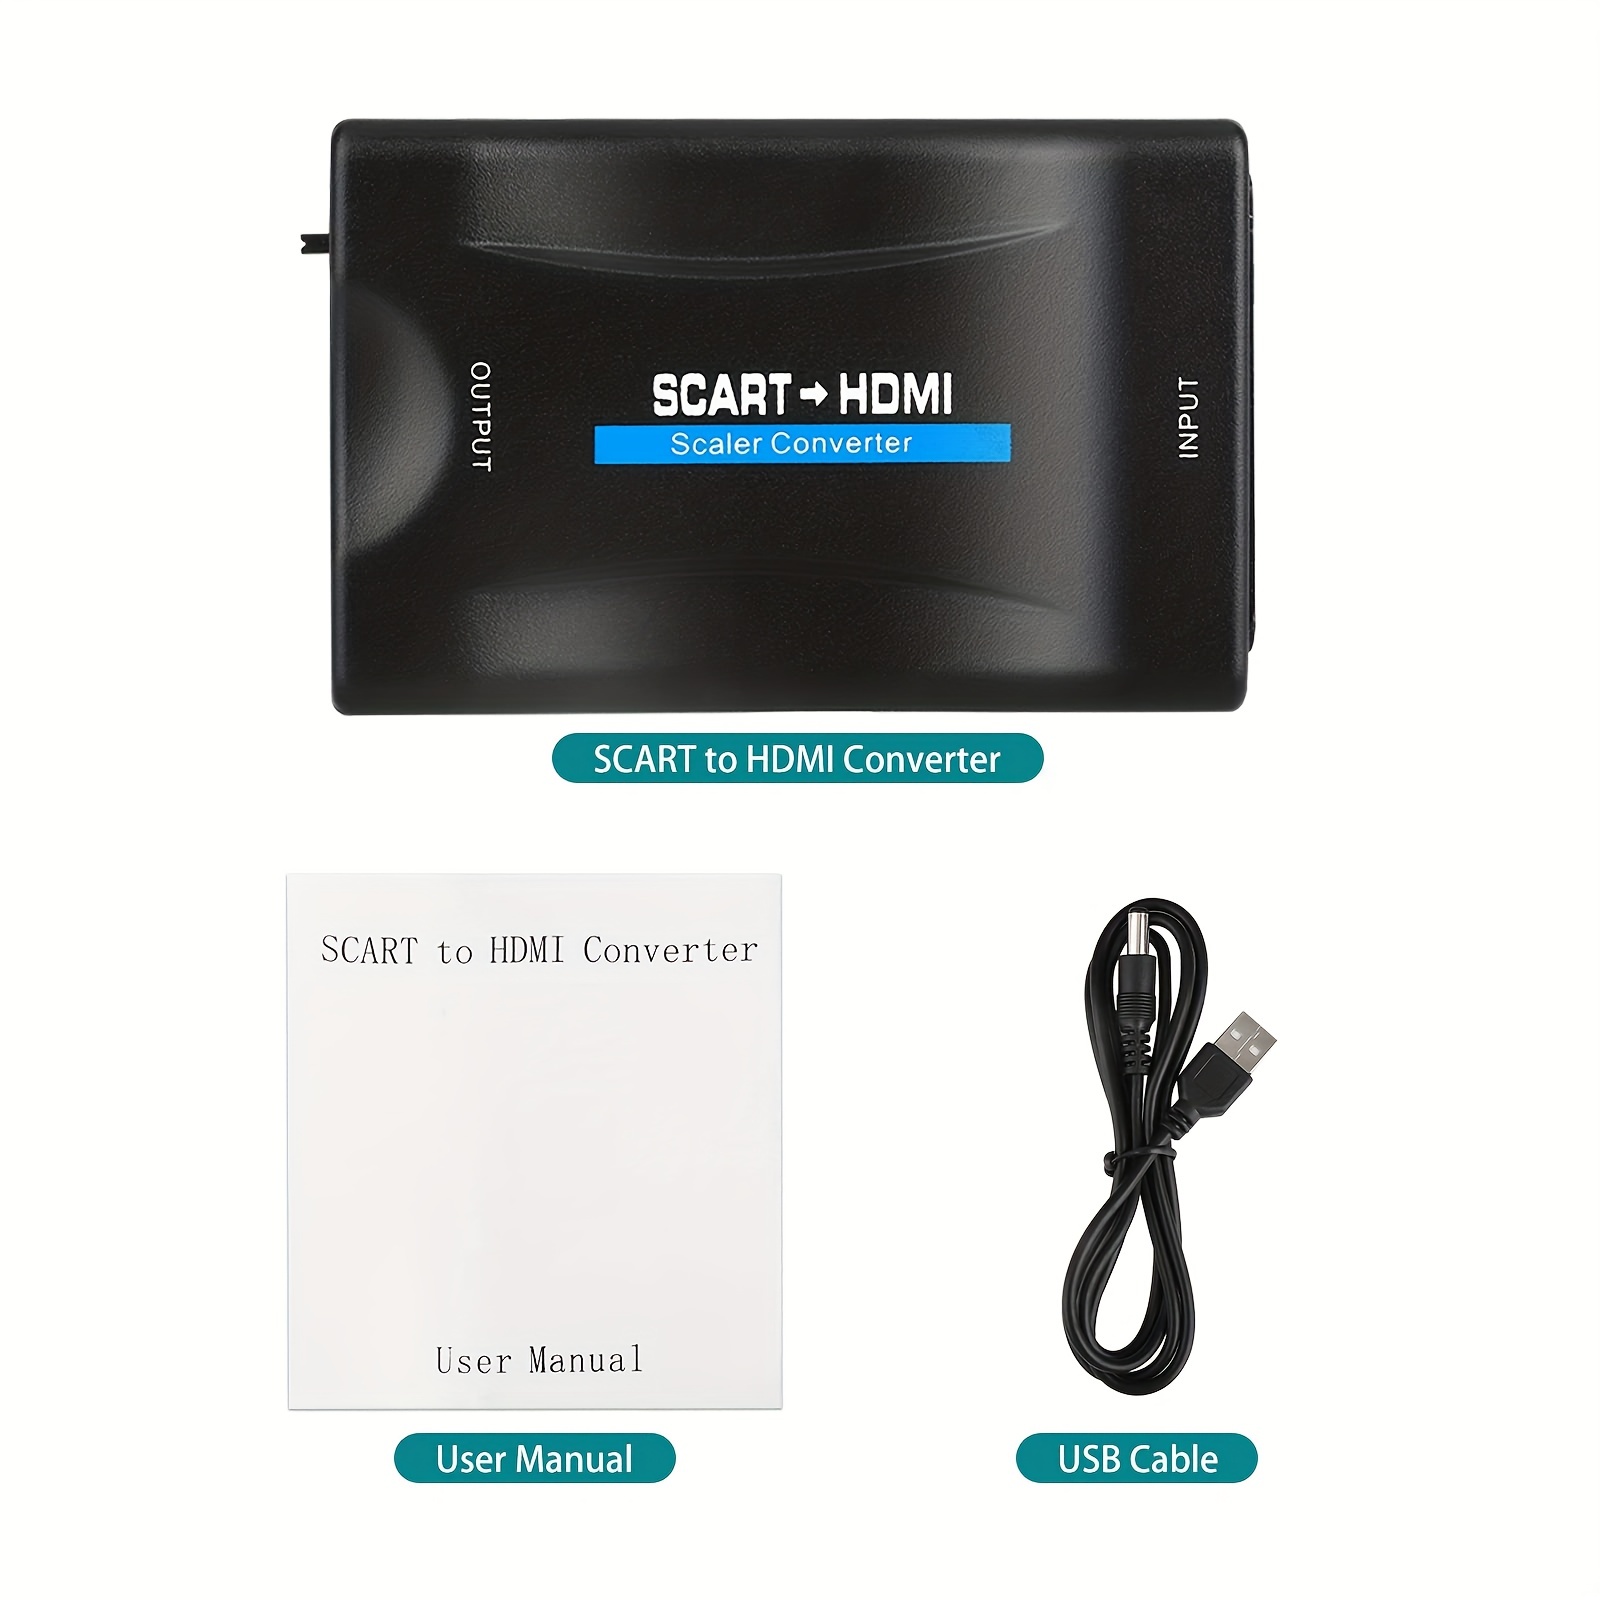 Scart to HDMI Converter - 720P 1080P USB Adapter for HD TV DVD for Sky Box  STB Plug and Play - Share Smart Phone Photos, Music and Movies on The HD TV